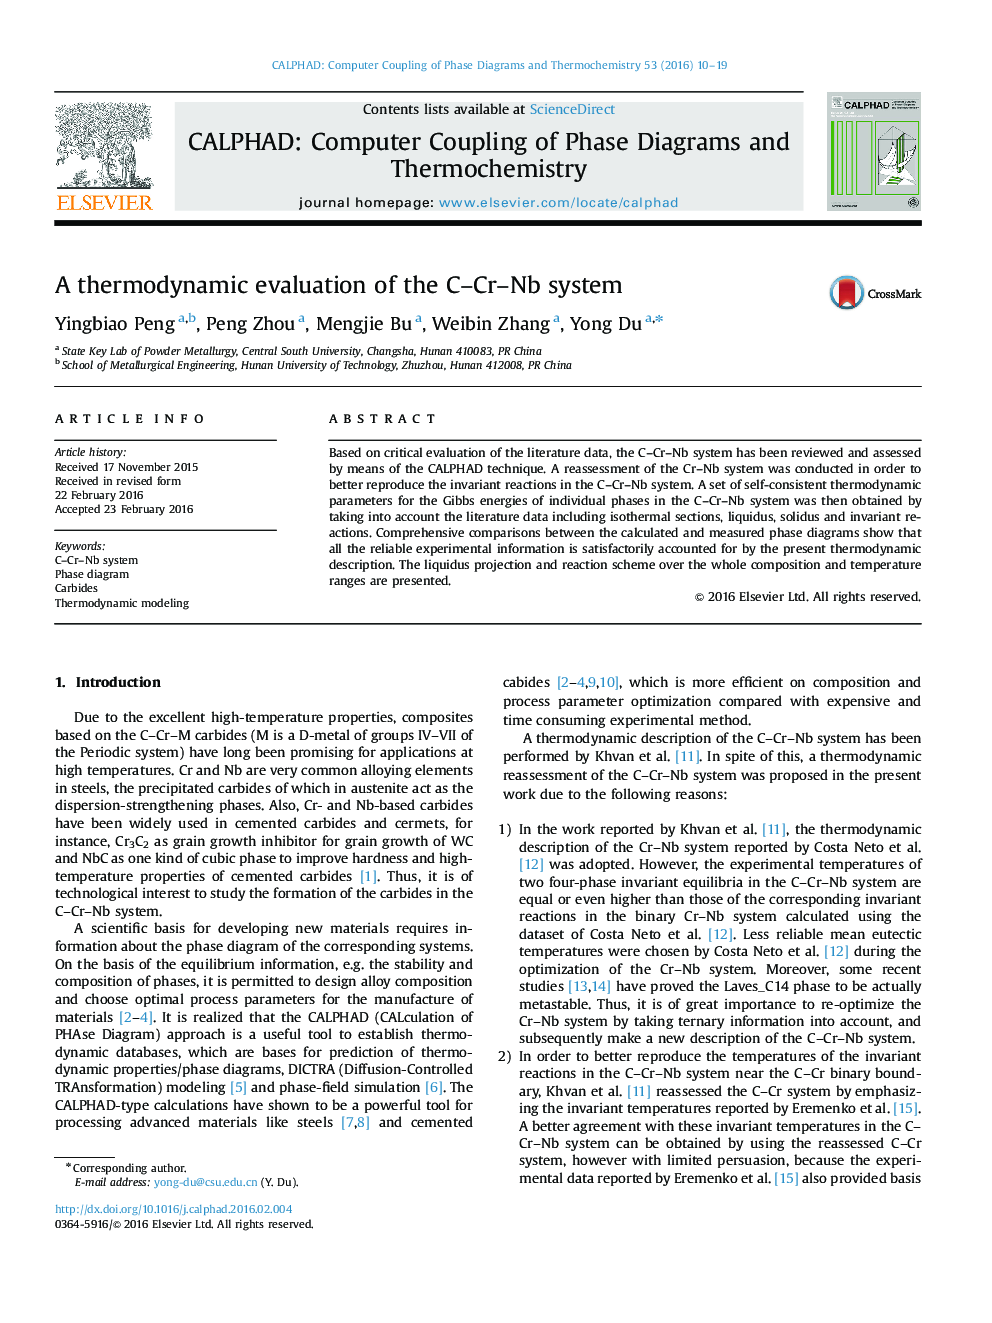 A thermodynamic evaluation of the C-Cr-Nb system